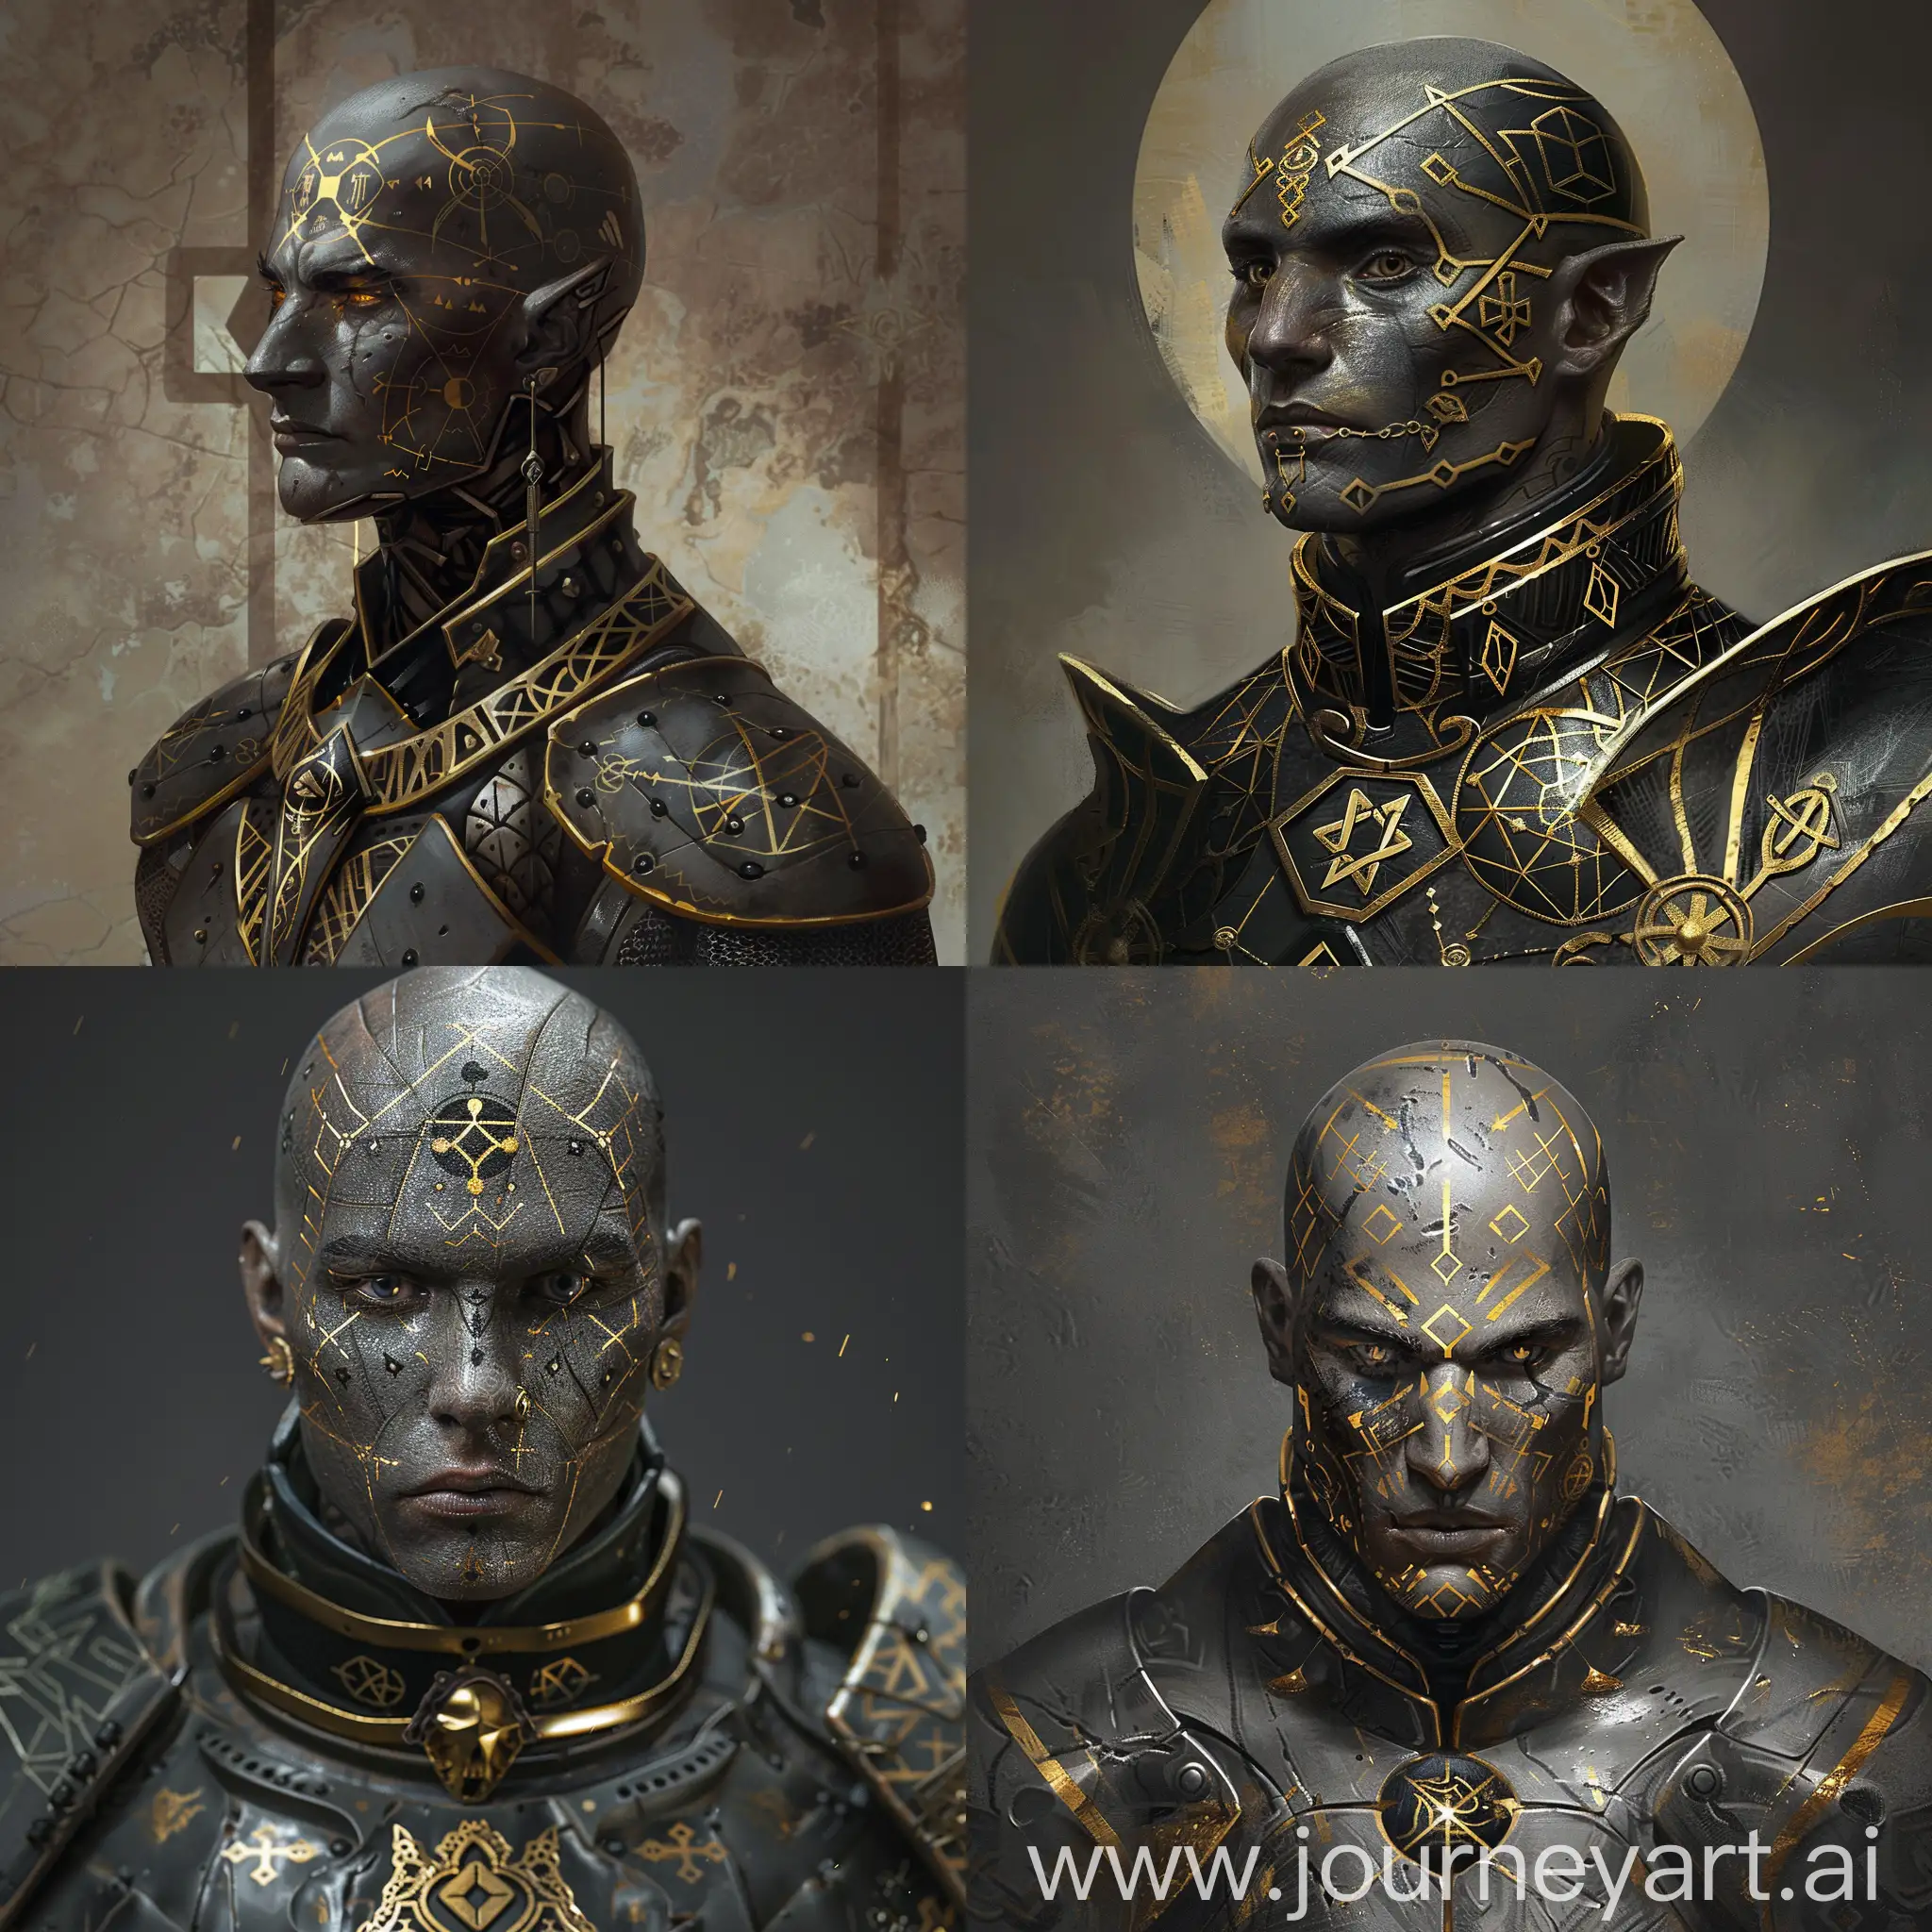 perfect bronze skin male, completely bald and shaved, his head is full of golden tattooes, golden latin symbols on his head and face, warrior cleric, there are black geometric symbols on his plate armor, fancy grey armor, with golden trim